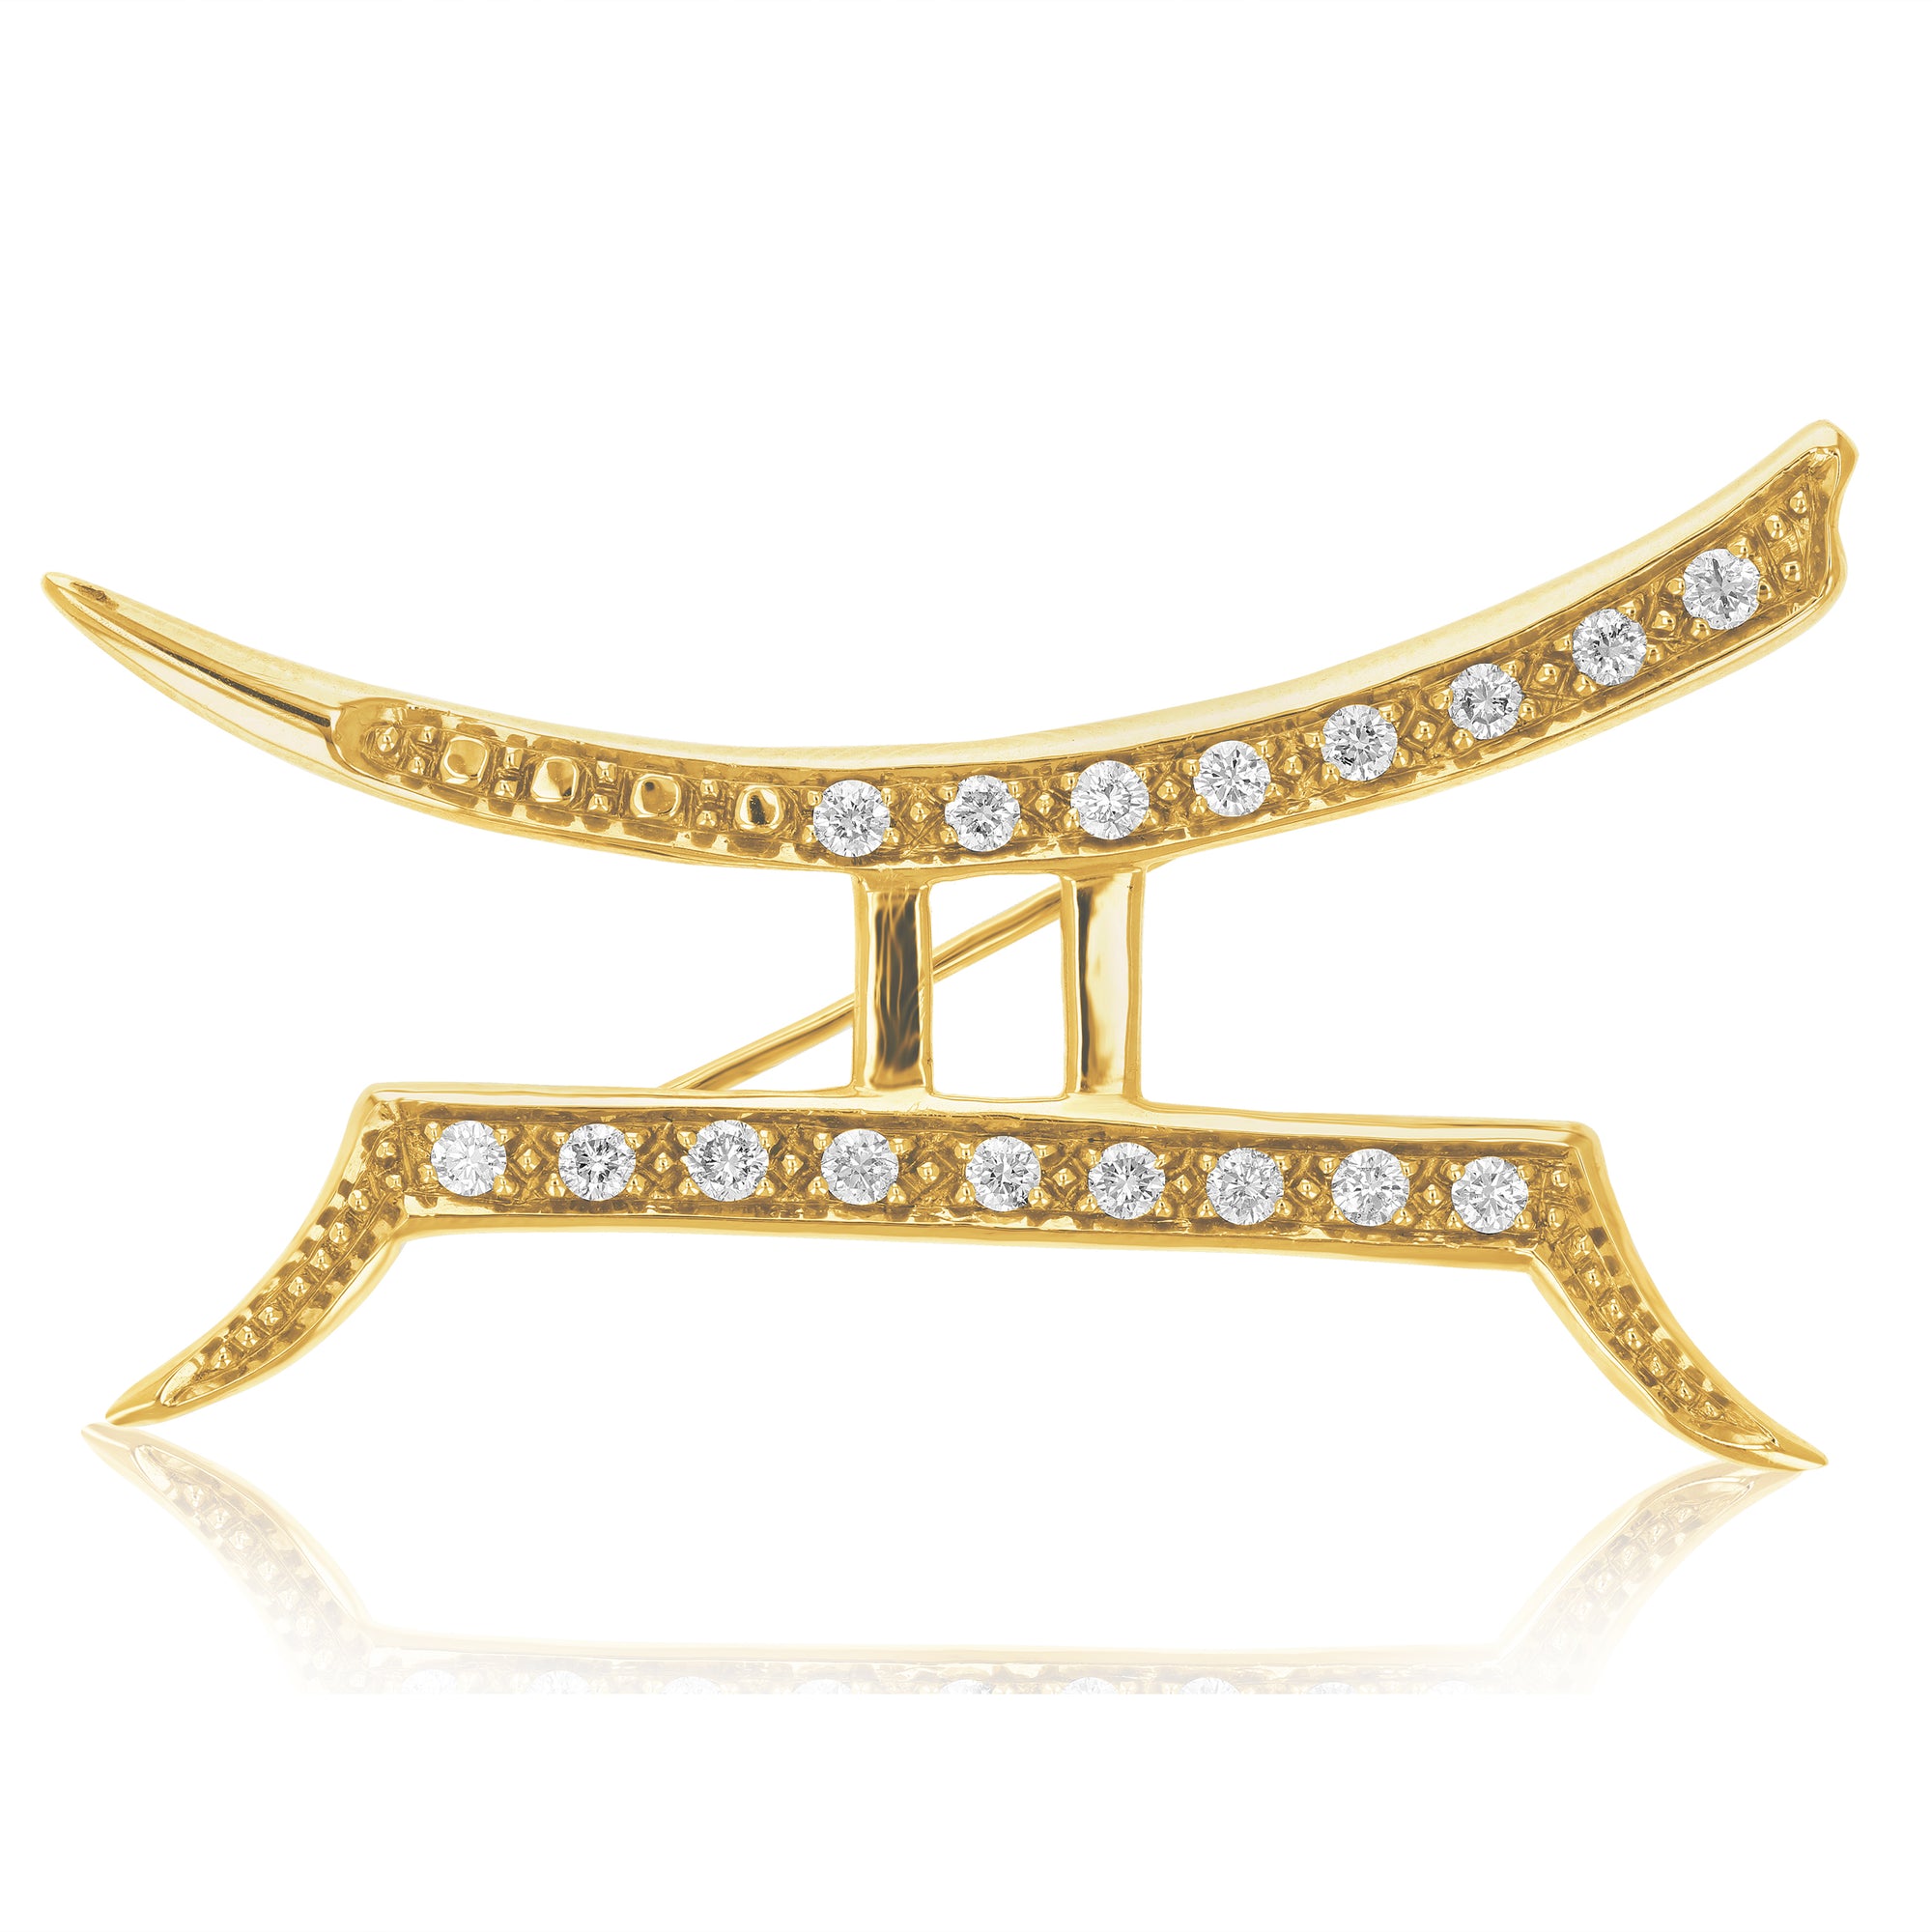 1/2 cttw Diamond Brooch Pin, Brooch Pin for Women Fashion in 14K Yellow Gold, Prong Setting, 1 3/4 Inch